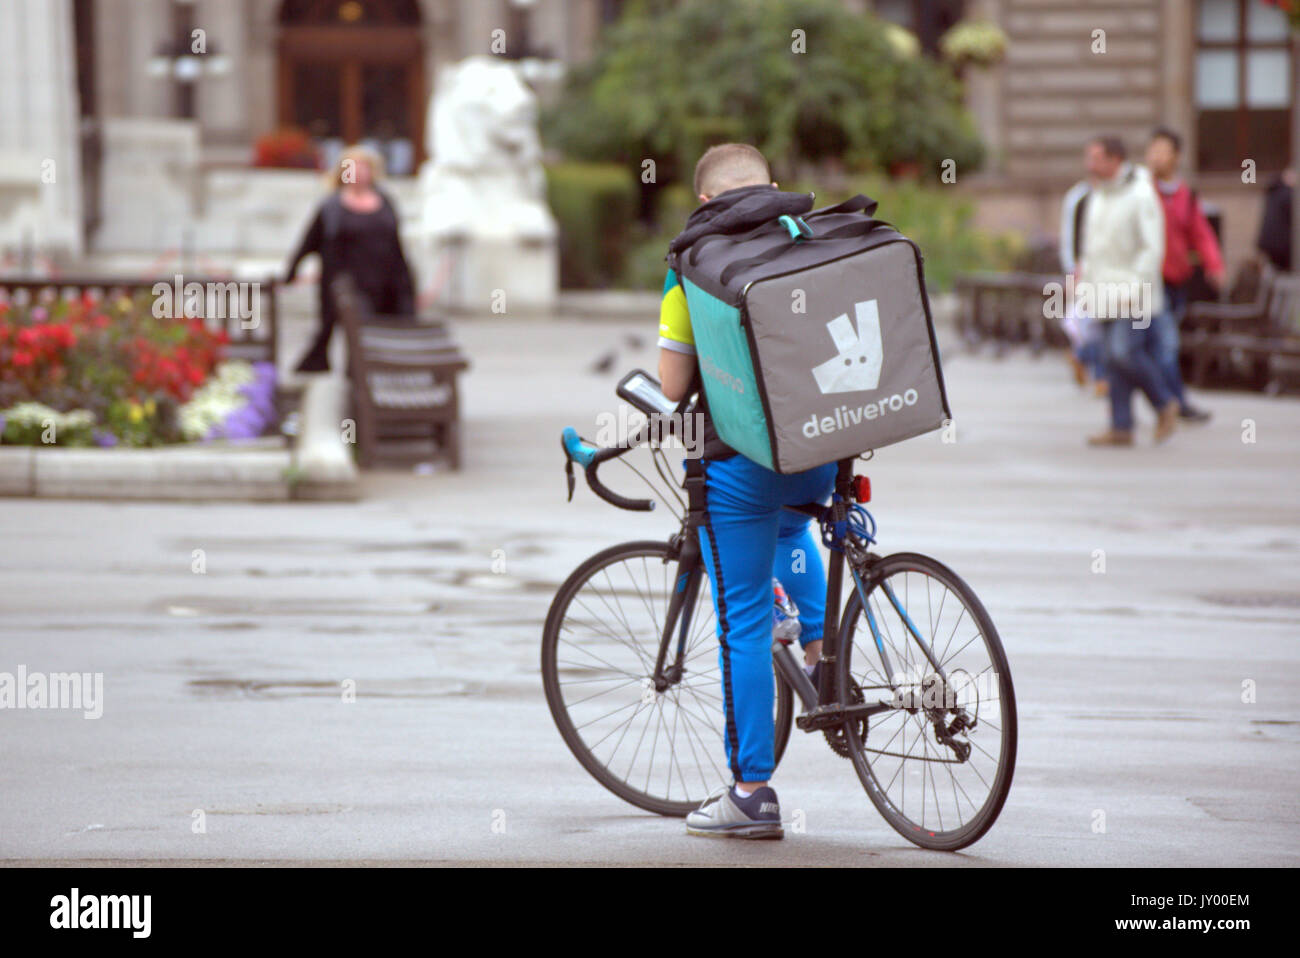 wet George square Glasgow young man boy delivery bike cyclist Deliveroo food delivery texting waiting for job delivering outside on street road Stock Photo